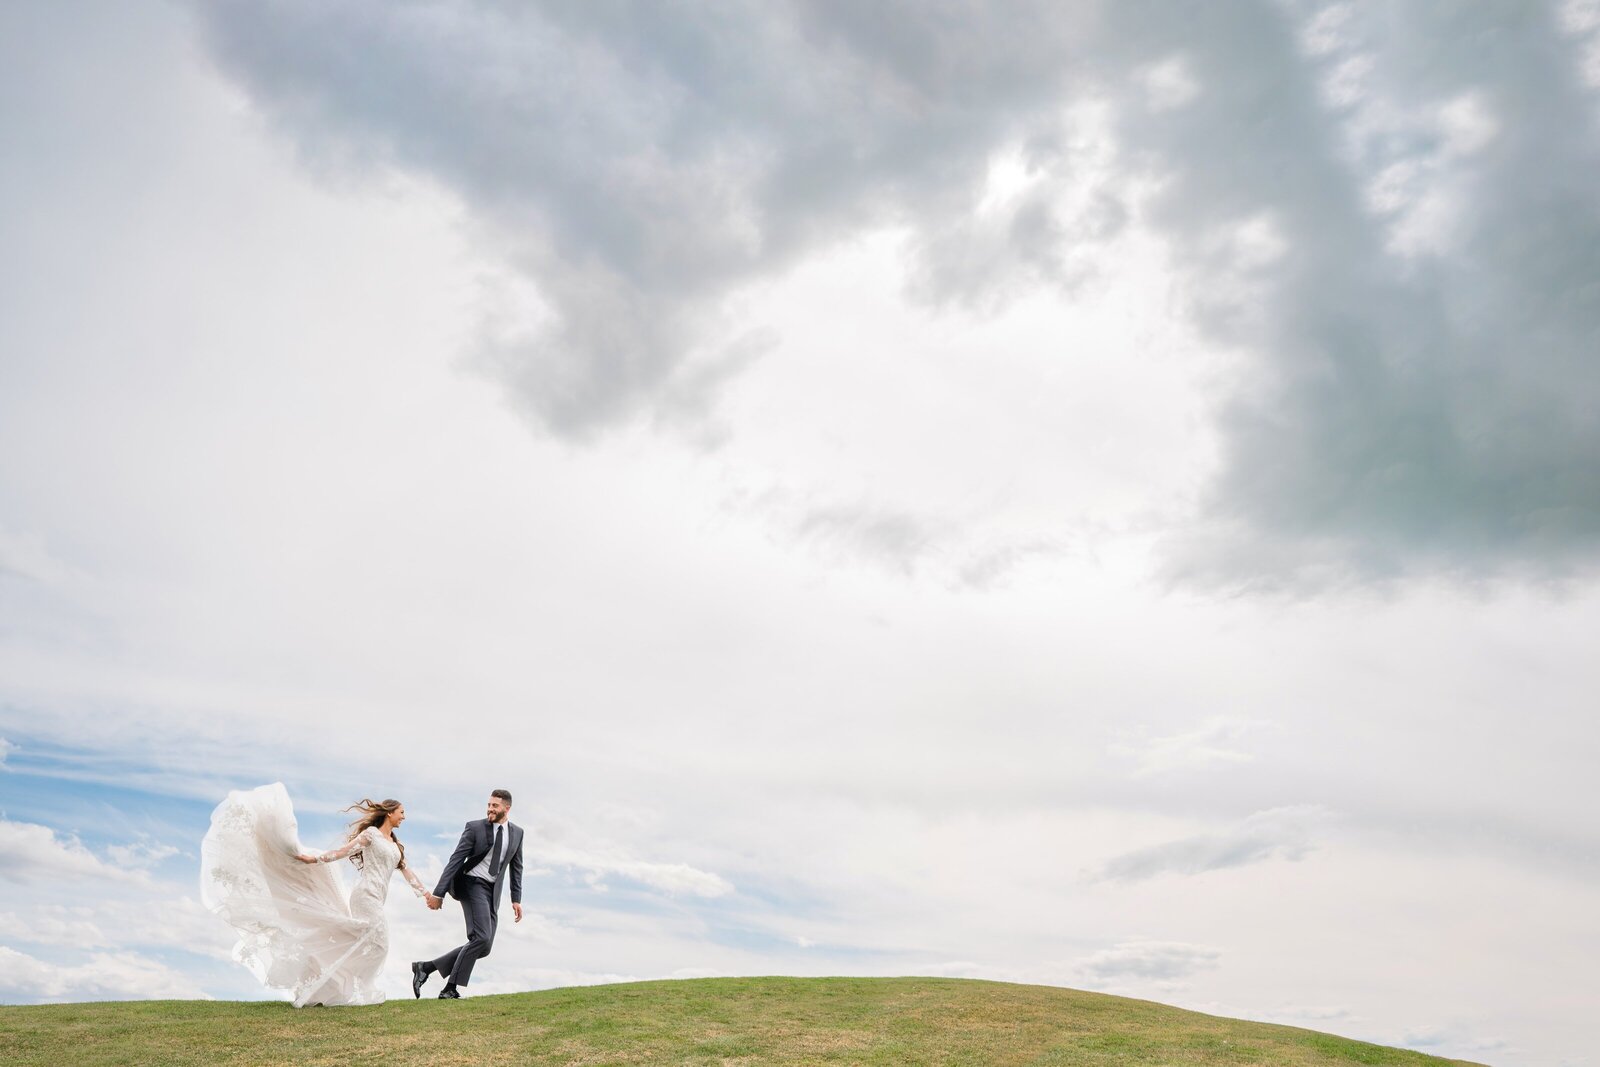 Bride and room running across a grassy hill with the sky and clouds in the background at Sleepy Ridge.